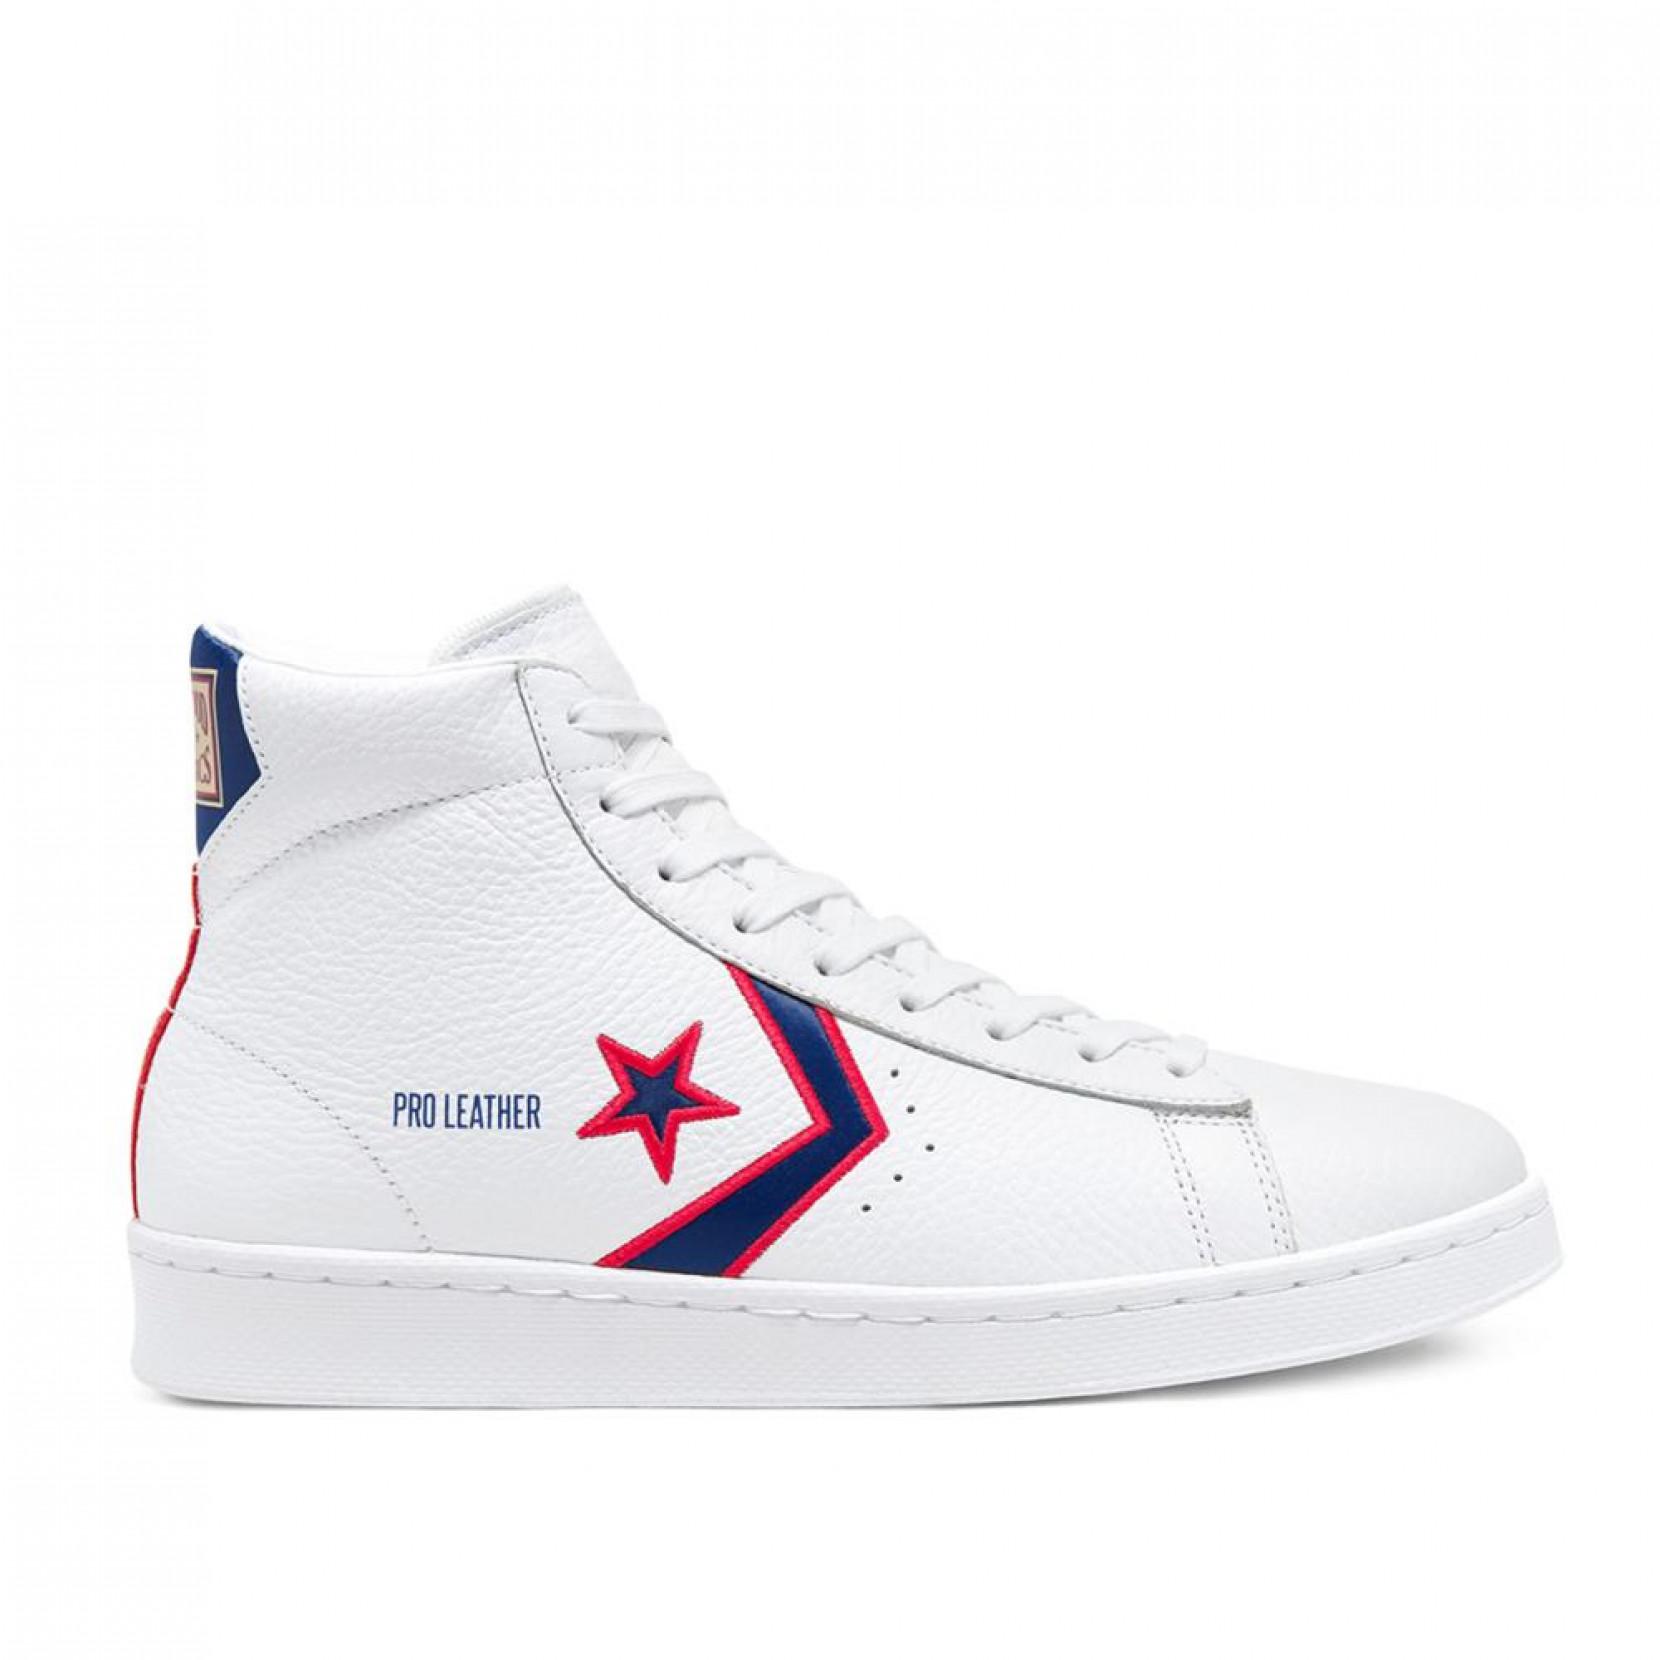 Converse Pro Leather Mid Basketball Shoes in White for Men - Save 78% ...